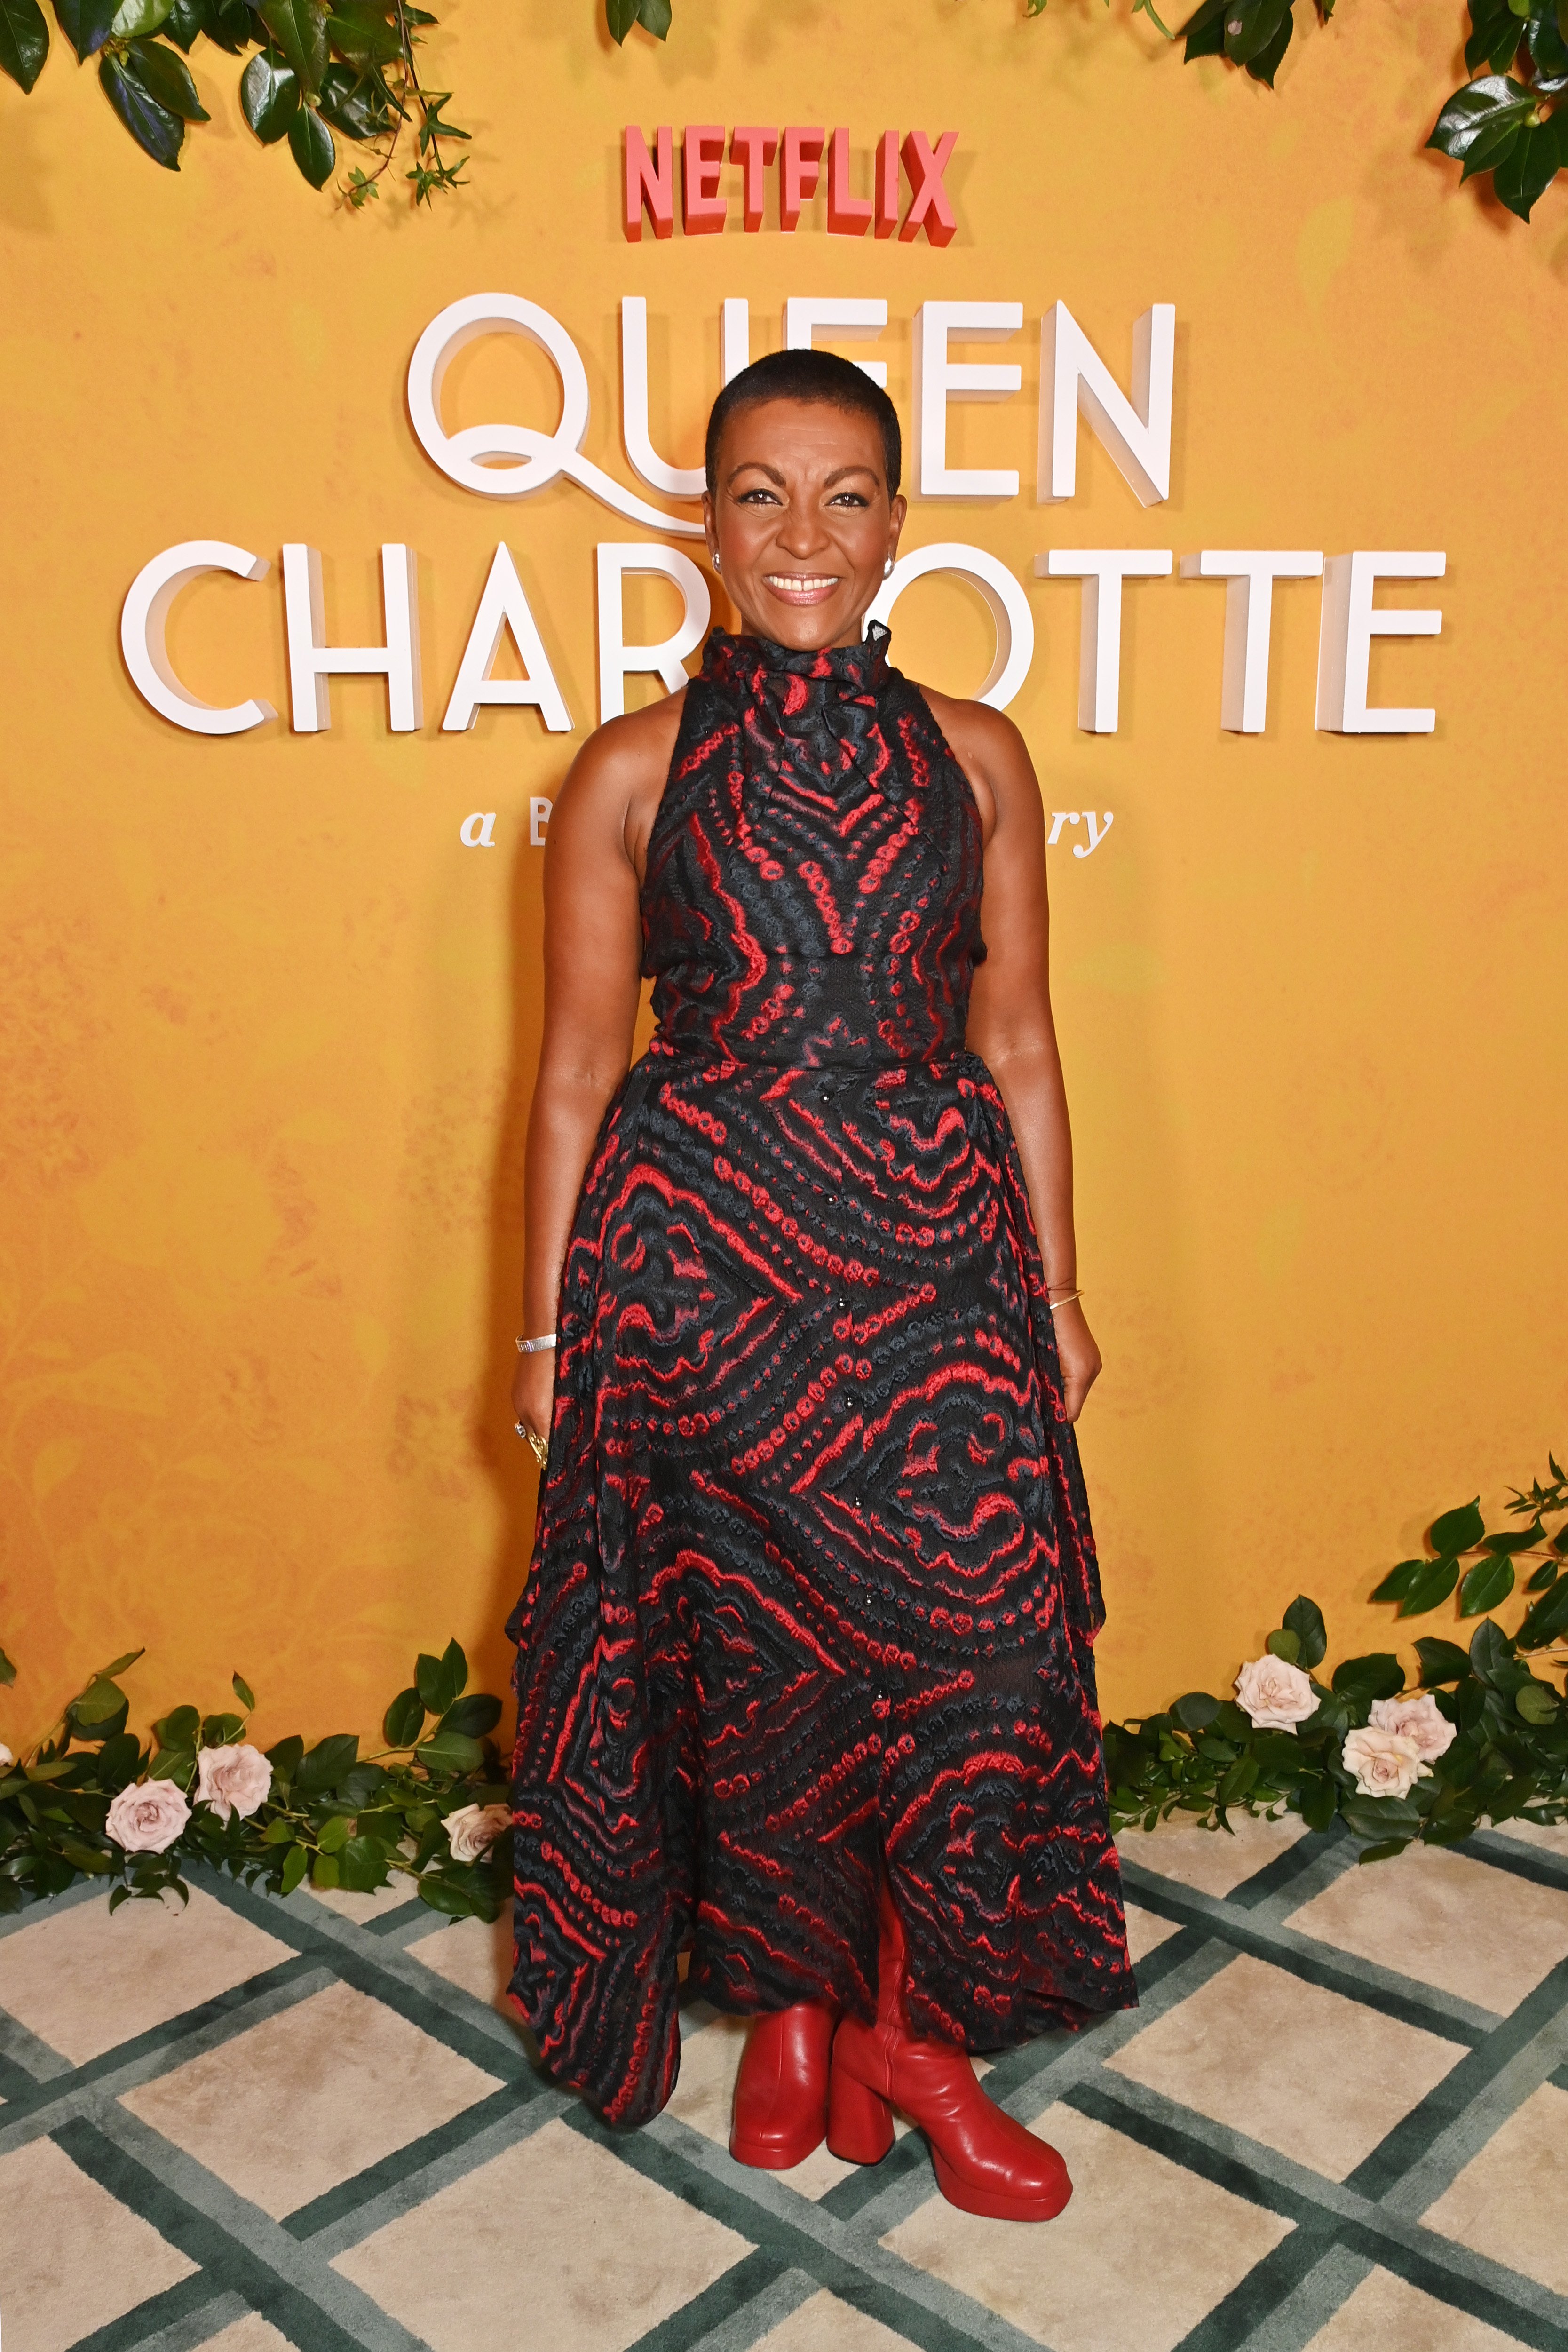 Adjoa Andoh at the Valentine's Day Global Teaser Trailer Reveal for "Queen Charlotte: A Bridgerton Story" on February 14, 2023, in London, England. | Source: Getty Images